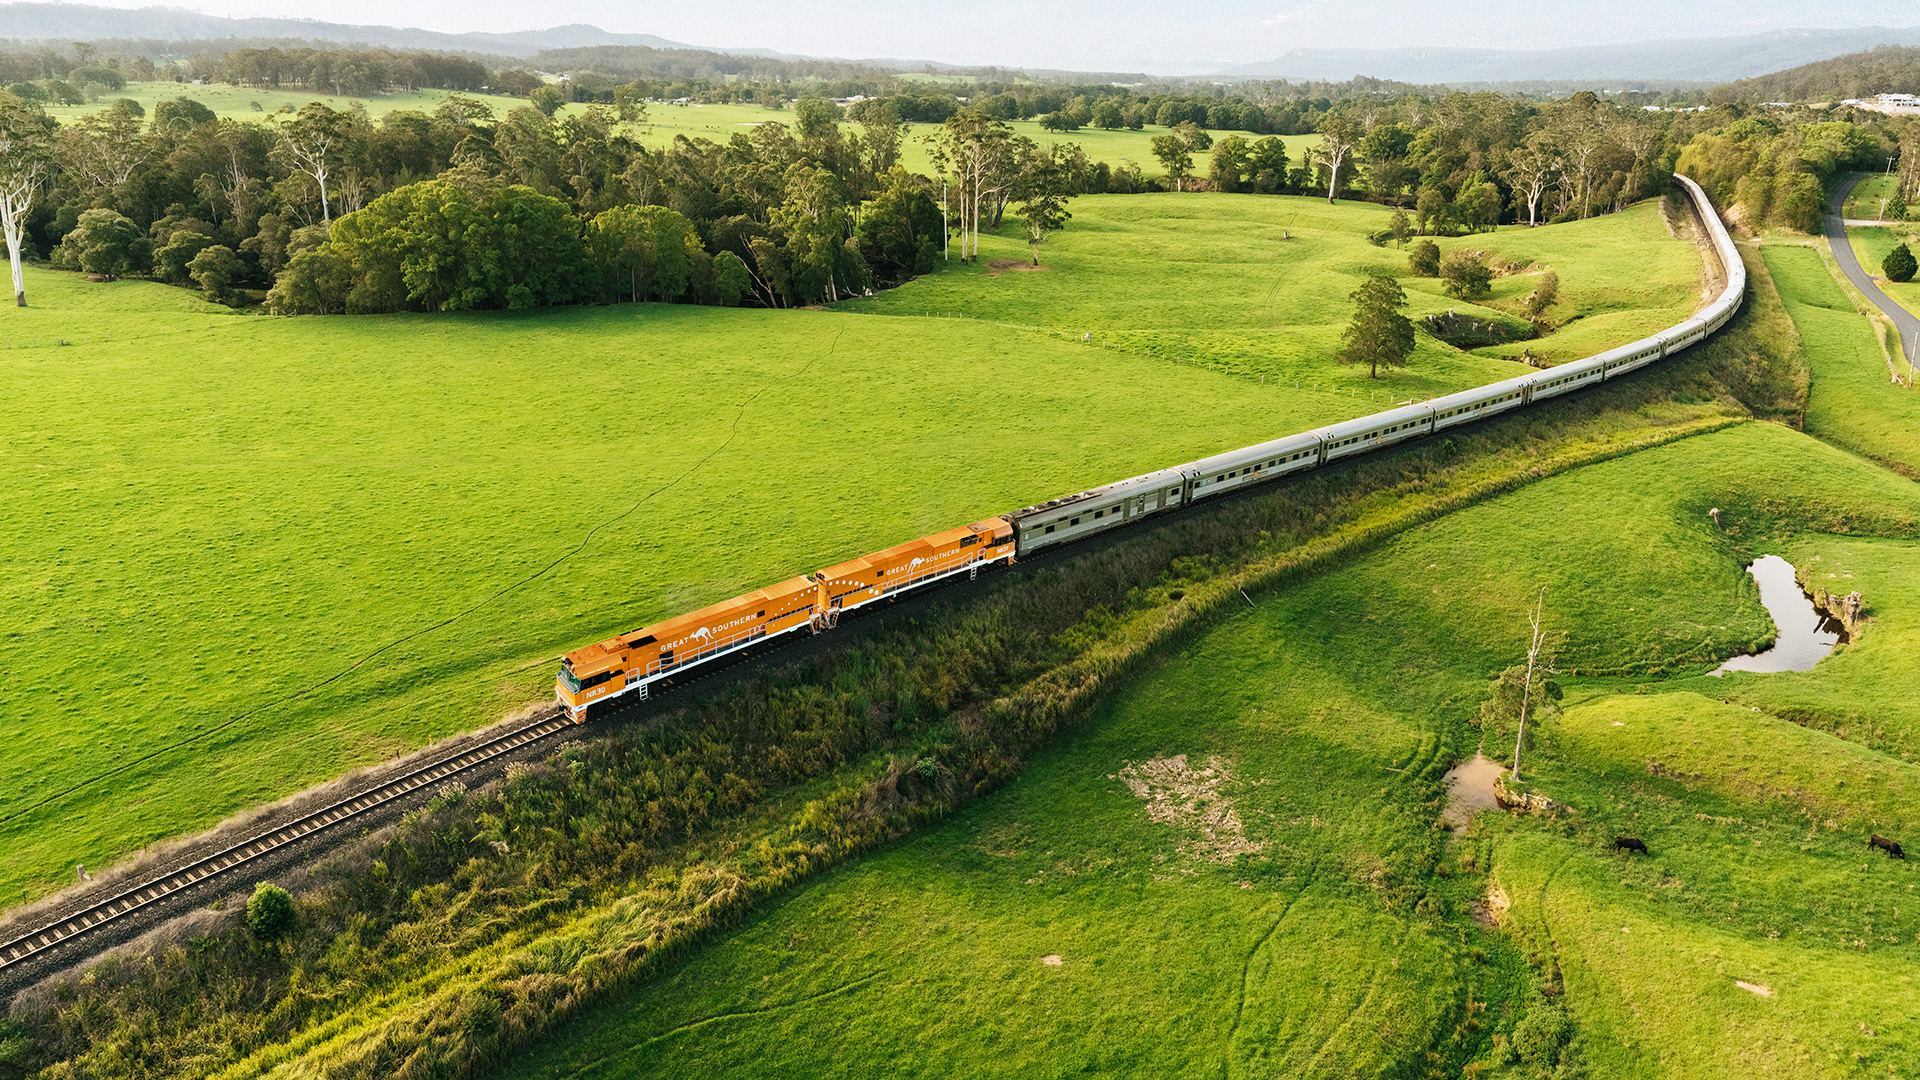 The Great Southern returns this December 2023 for the 2023/24 summer season, marking the rail journey's fifth season exploring Australia's east coast by train.